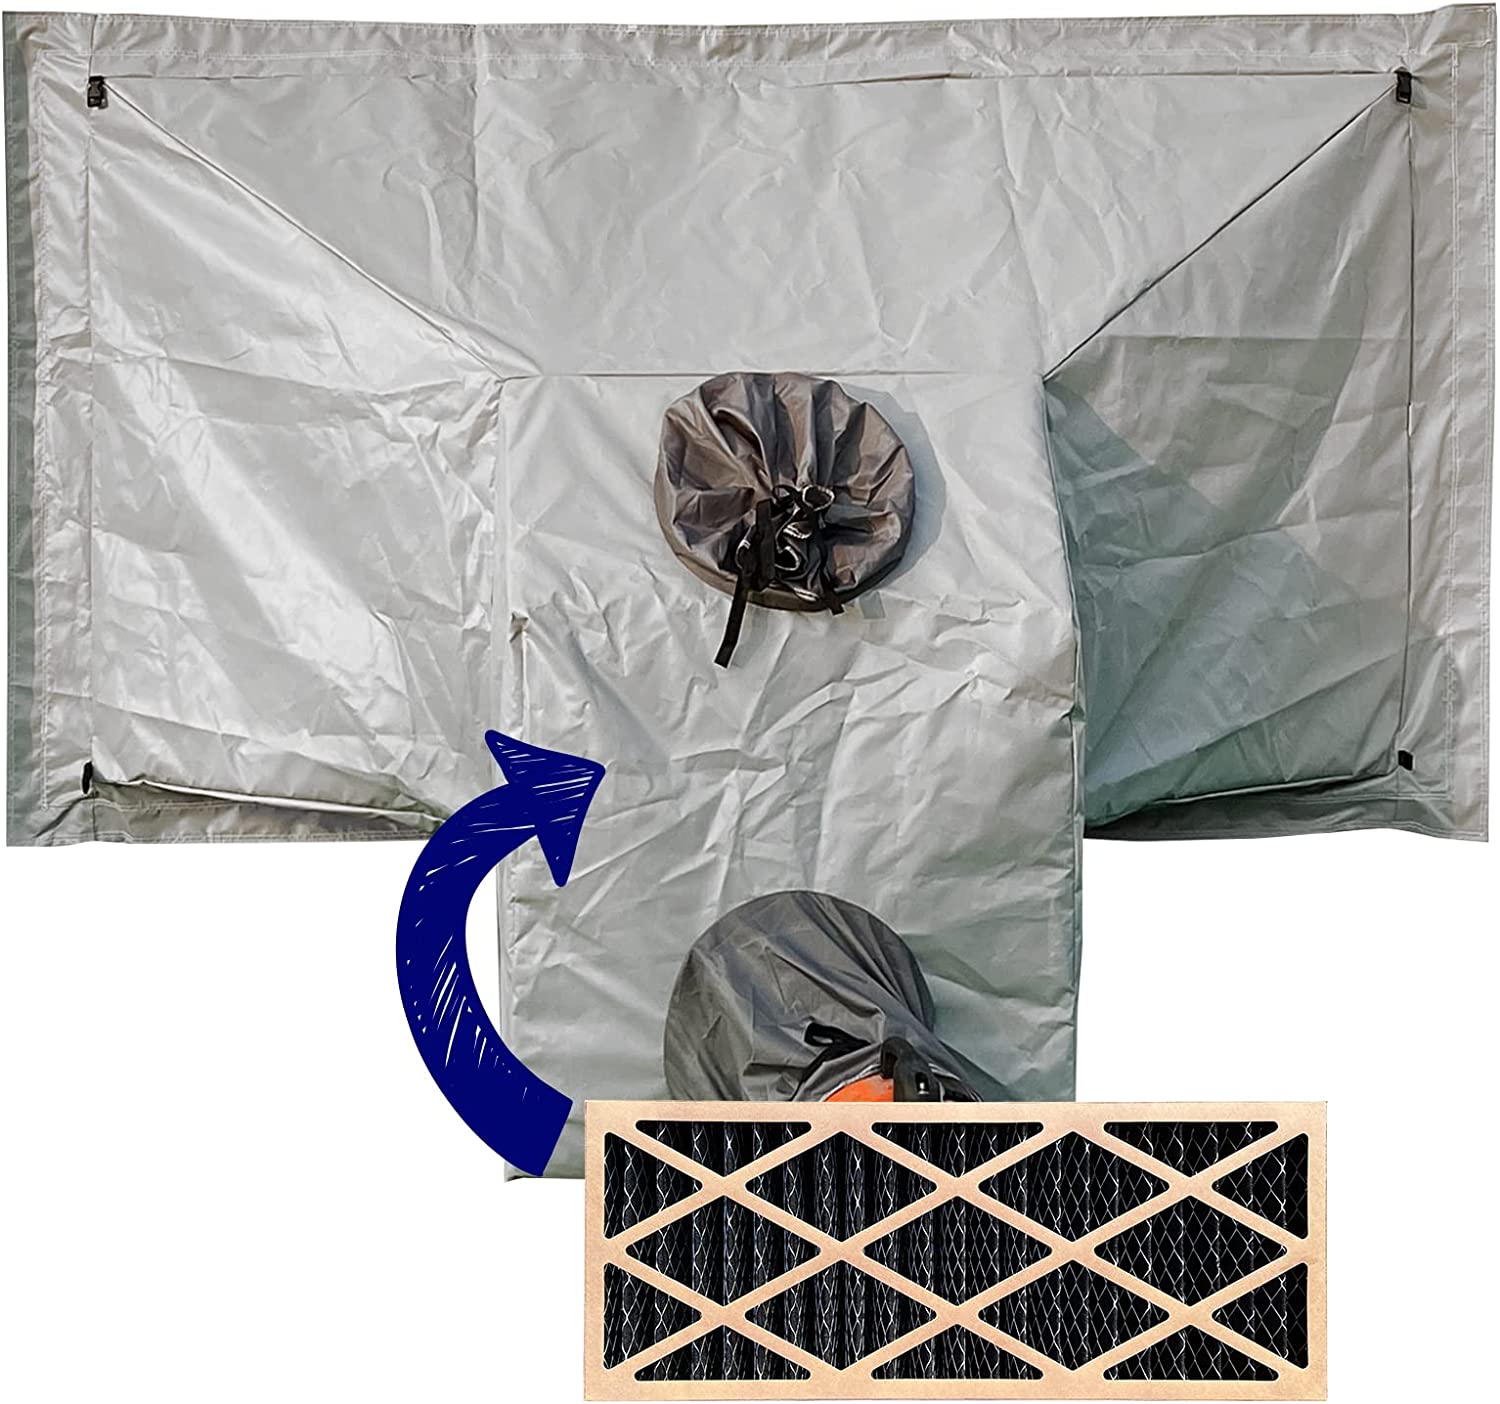 Oversized Exhaust Ventilation Device for Indoor, Air Circulation Optimized and Prevent Overspray - Applicable to GORILLASPRO 42.5X21.5X18.6Ft Inflatable Paint Booth